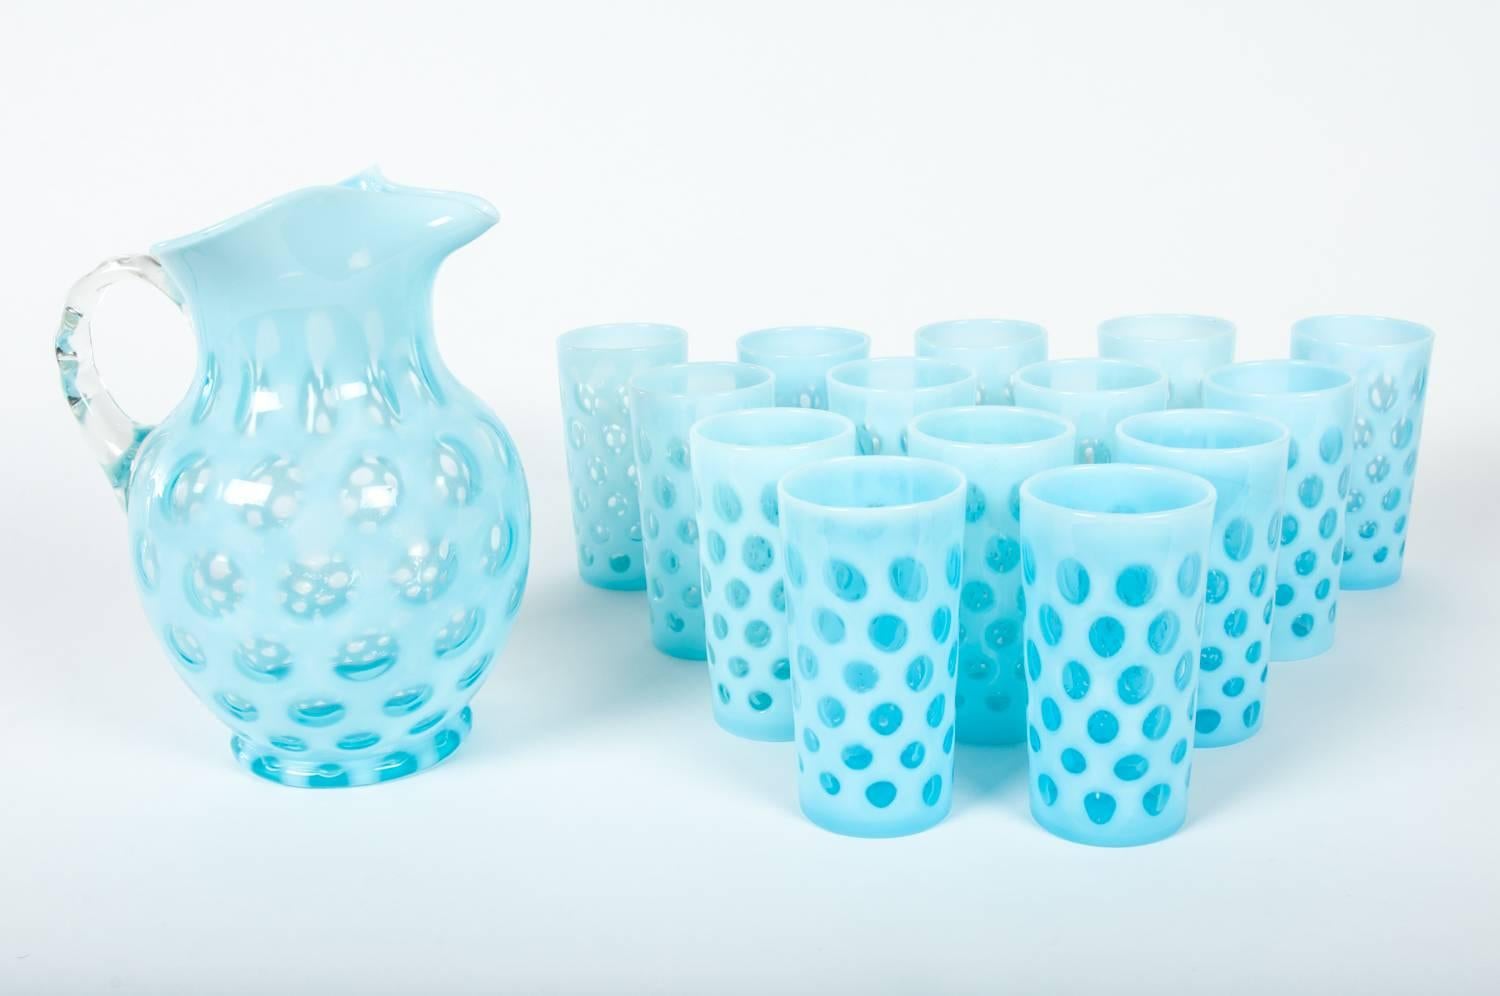 Vintage blue opalescent coin dot fenton 15-piece set. The set Include one large pitcher 10 inches tall x 7 Inches wide and 14 drinks glasses each one measure 5.2 inches tall x 3 inches wide. Excellent condition.